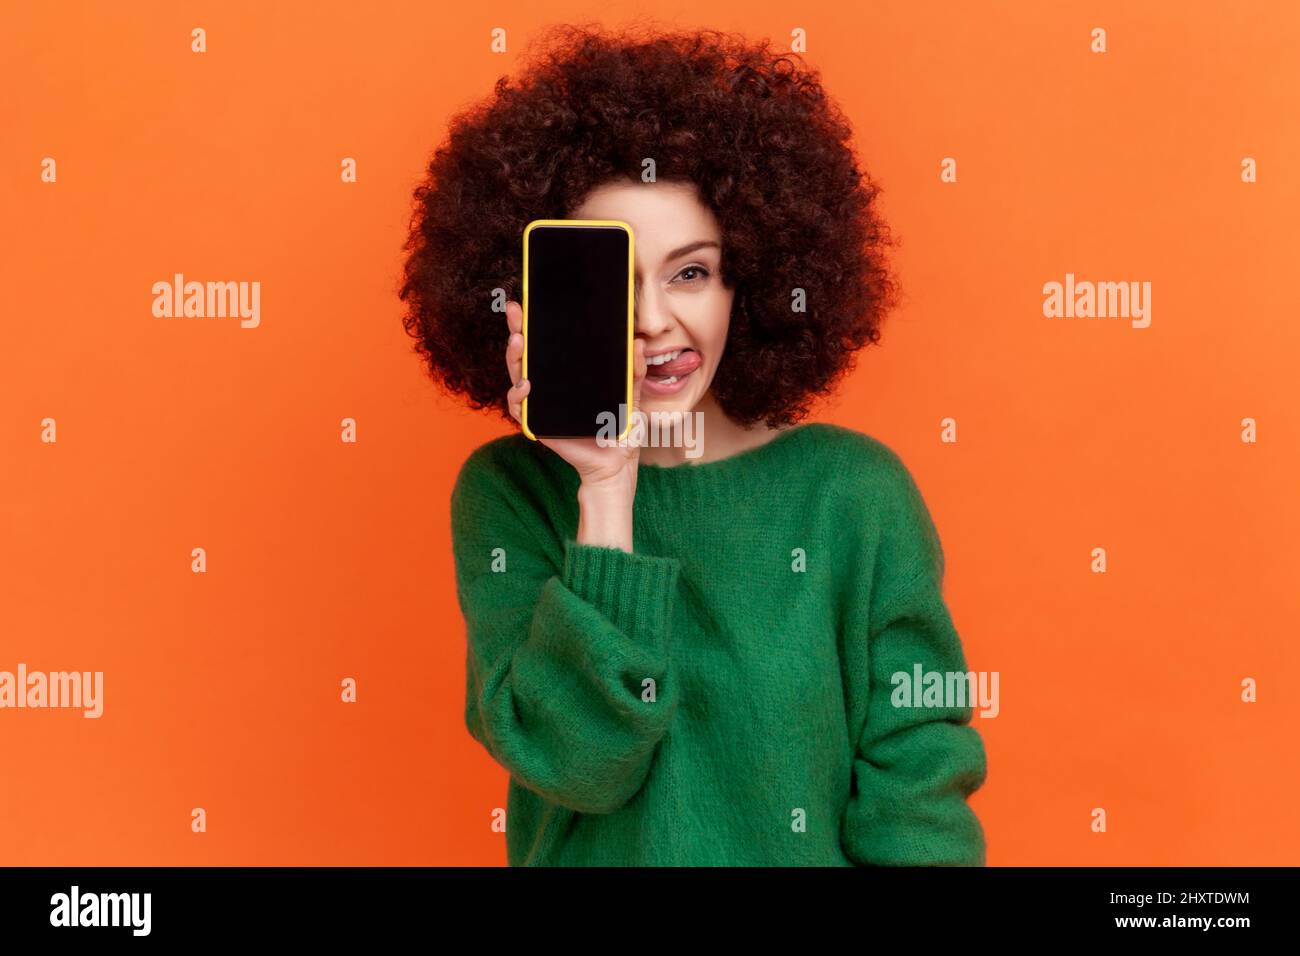 Positive funny woman with Afro hairstyle wearing green casual style sweater covering eye with cell phone with blank screen and showing tongue out. Indoor studio shot isolated on orange background. Stock Photo